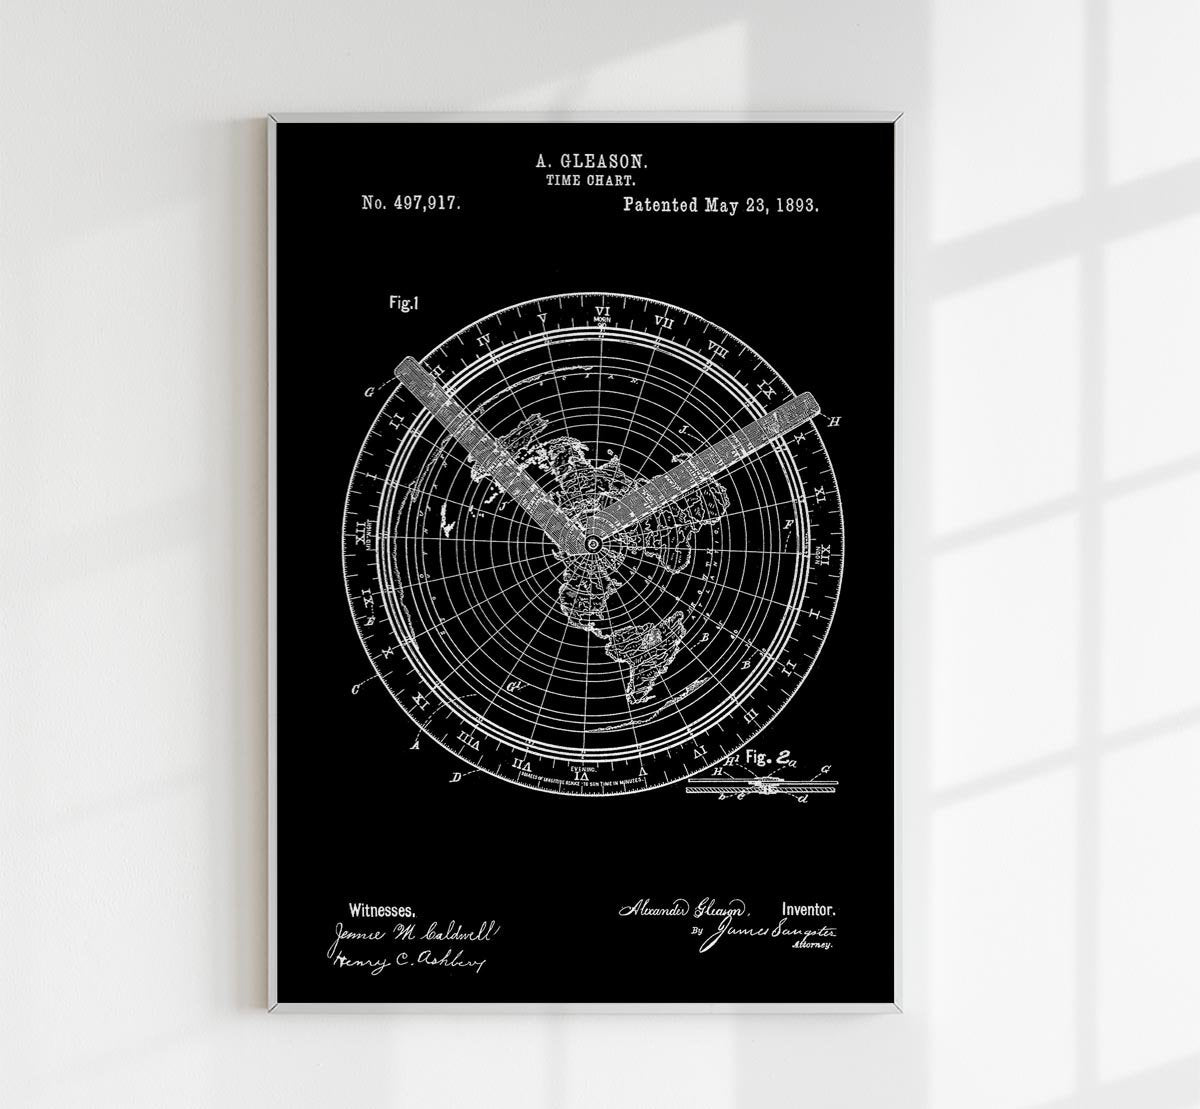 Time Chart Patent Poster